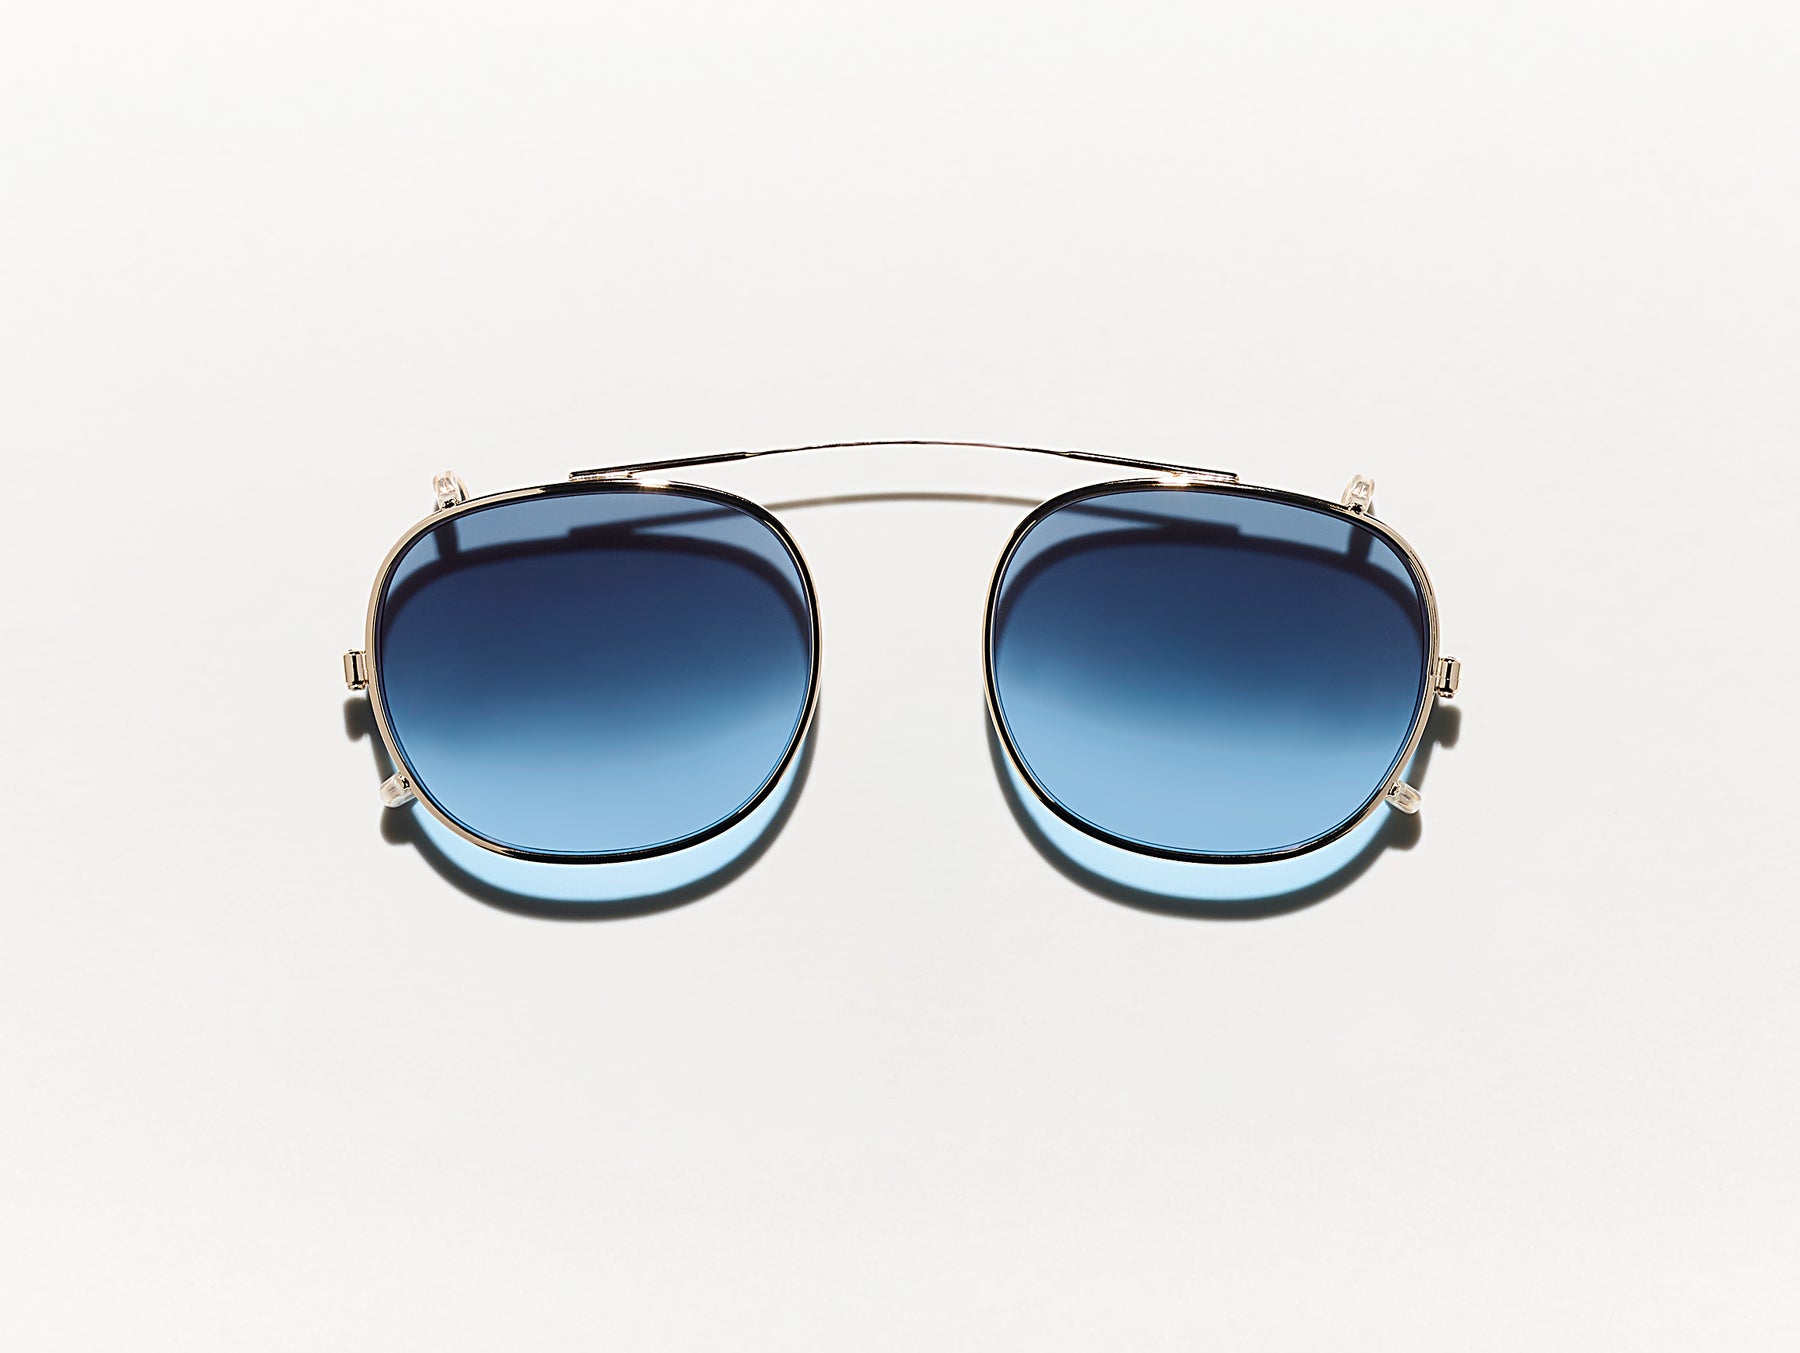 The CLIPTOSH in Gold with Denim Blue Tinted Lenses